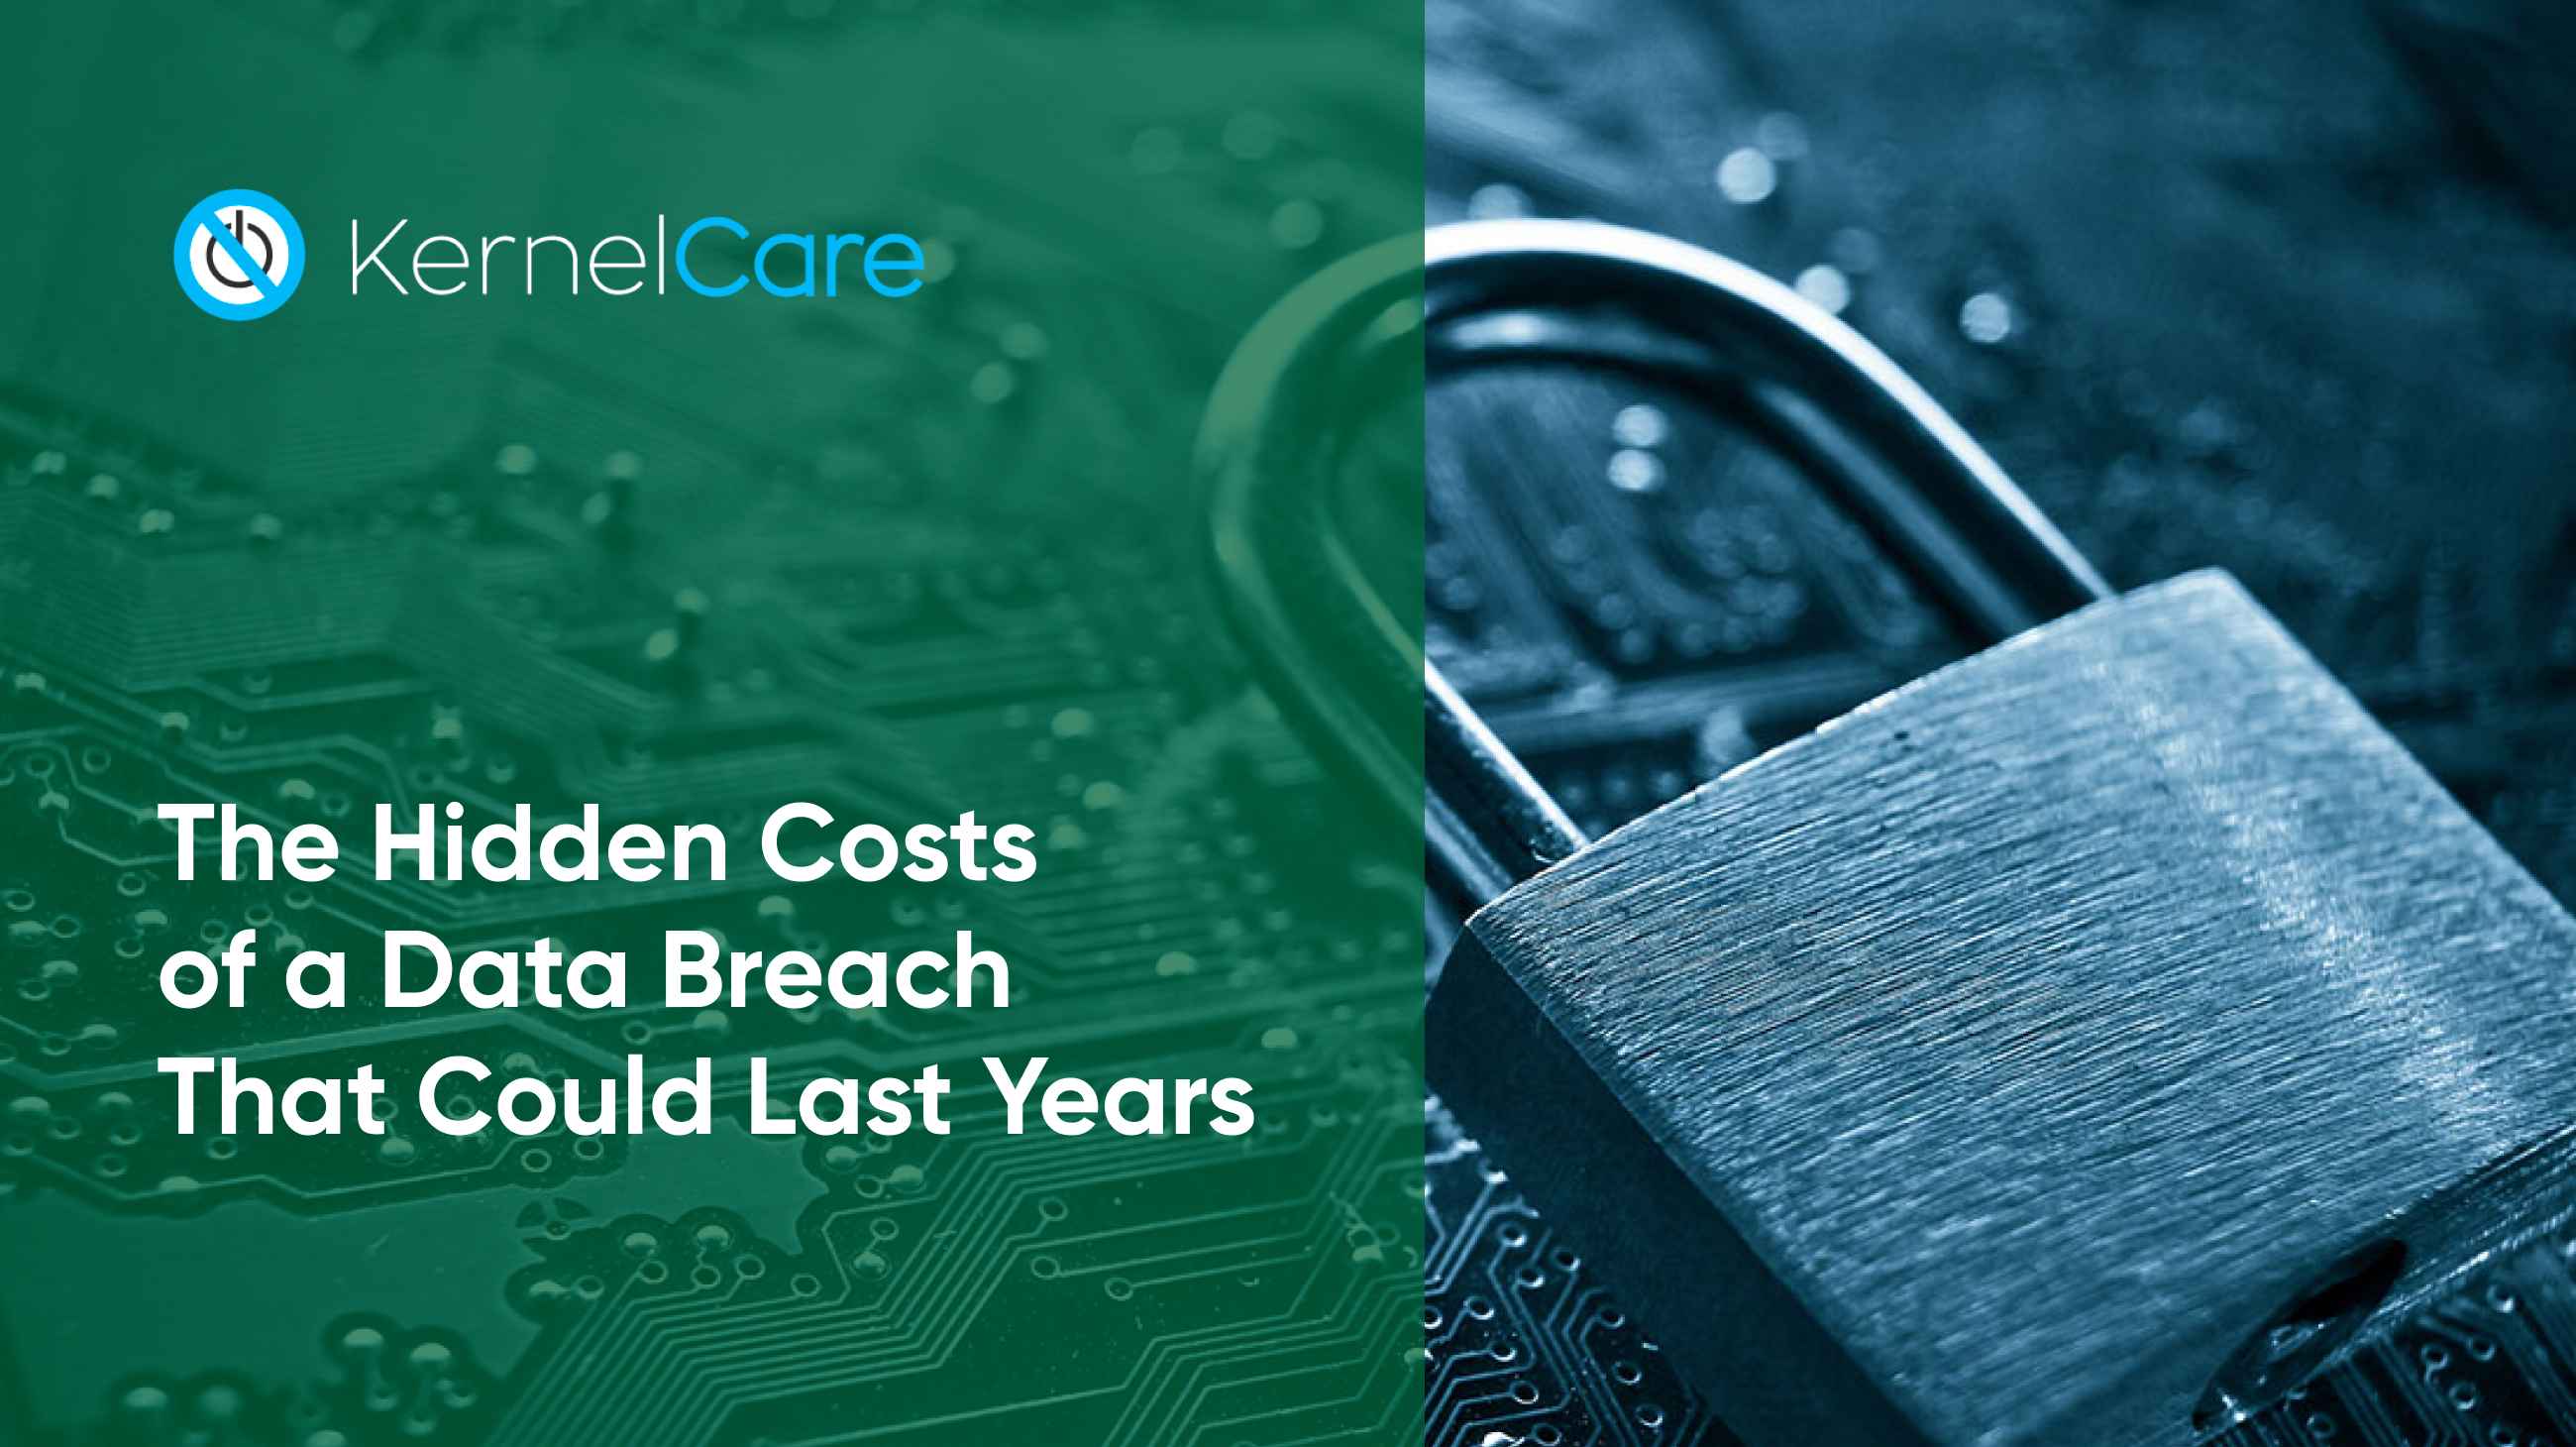 The Hidden Costs of a Data Breach That Could Last Years